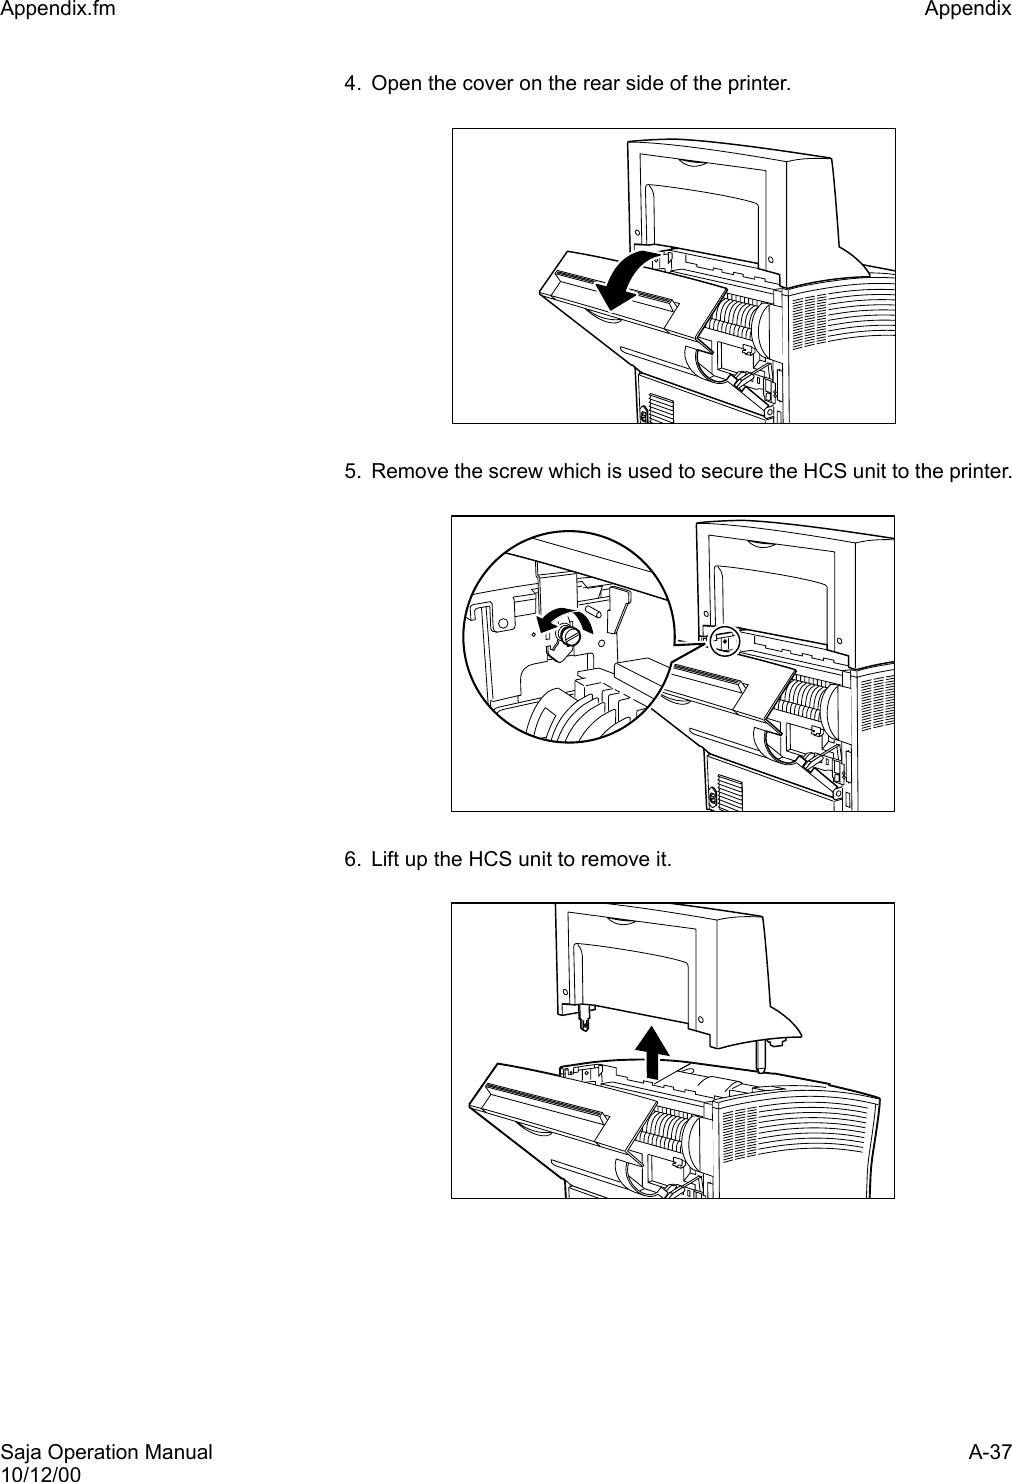 Saja Operation Manual A-3710/12/00Appendix.fm Appendix 4. Open the cover on the rear side of the printer.5. Remove the screw which is used to secure the HCS unit to the printer.6. Lift up the HCS unit to remove it.